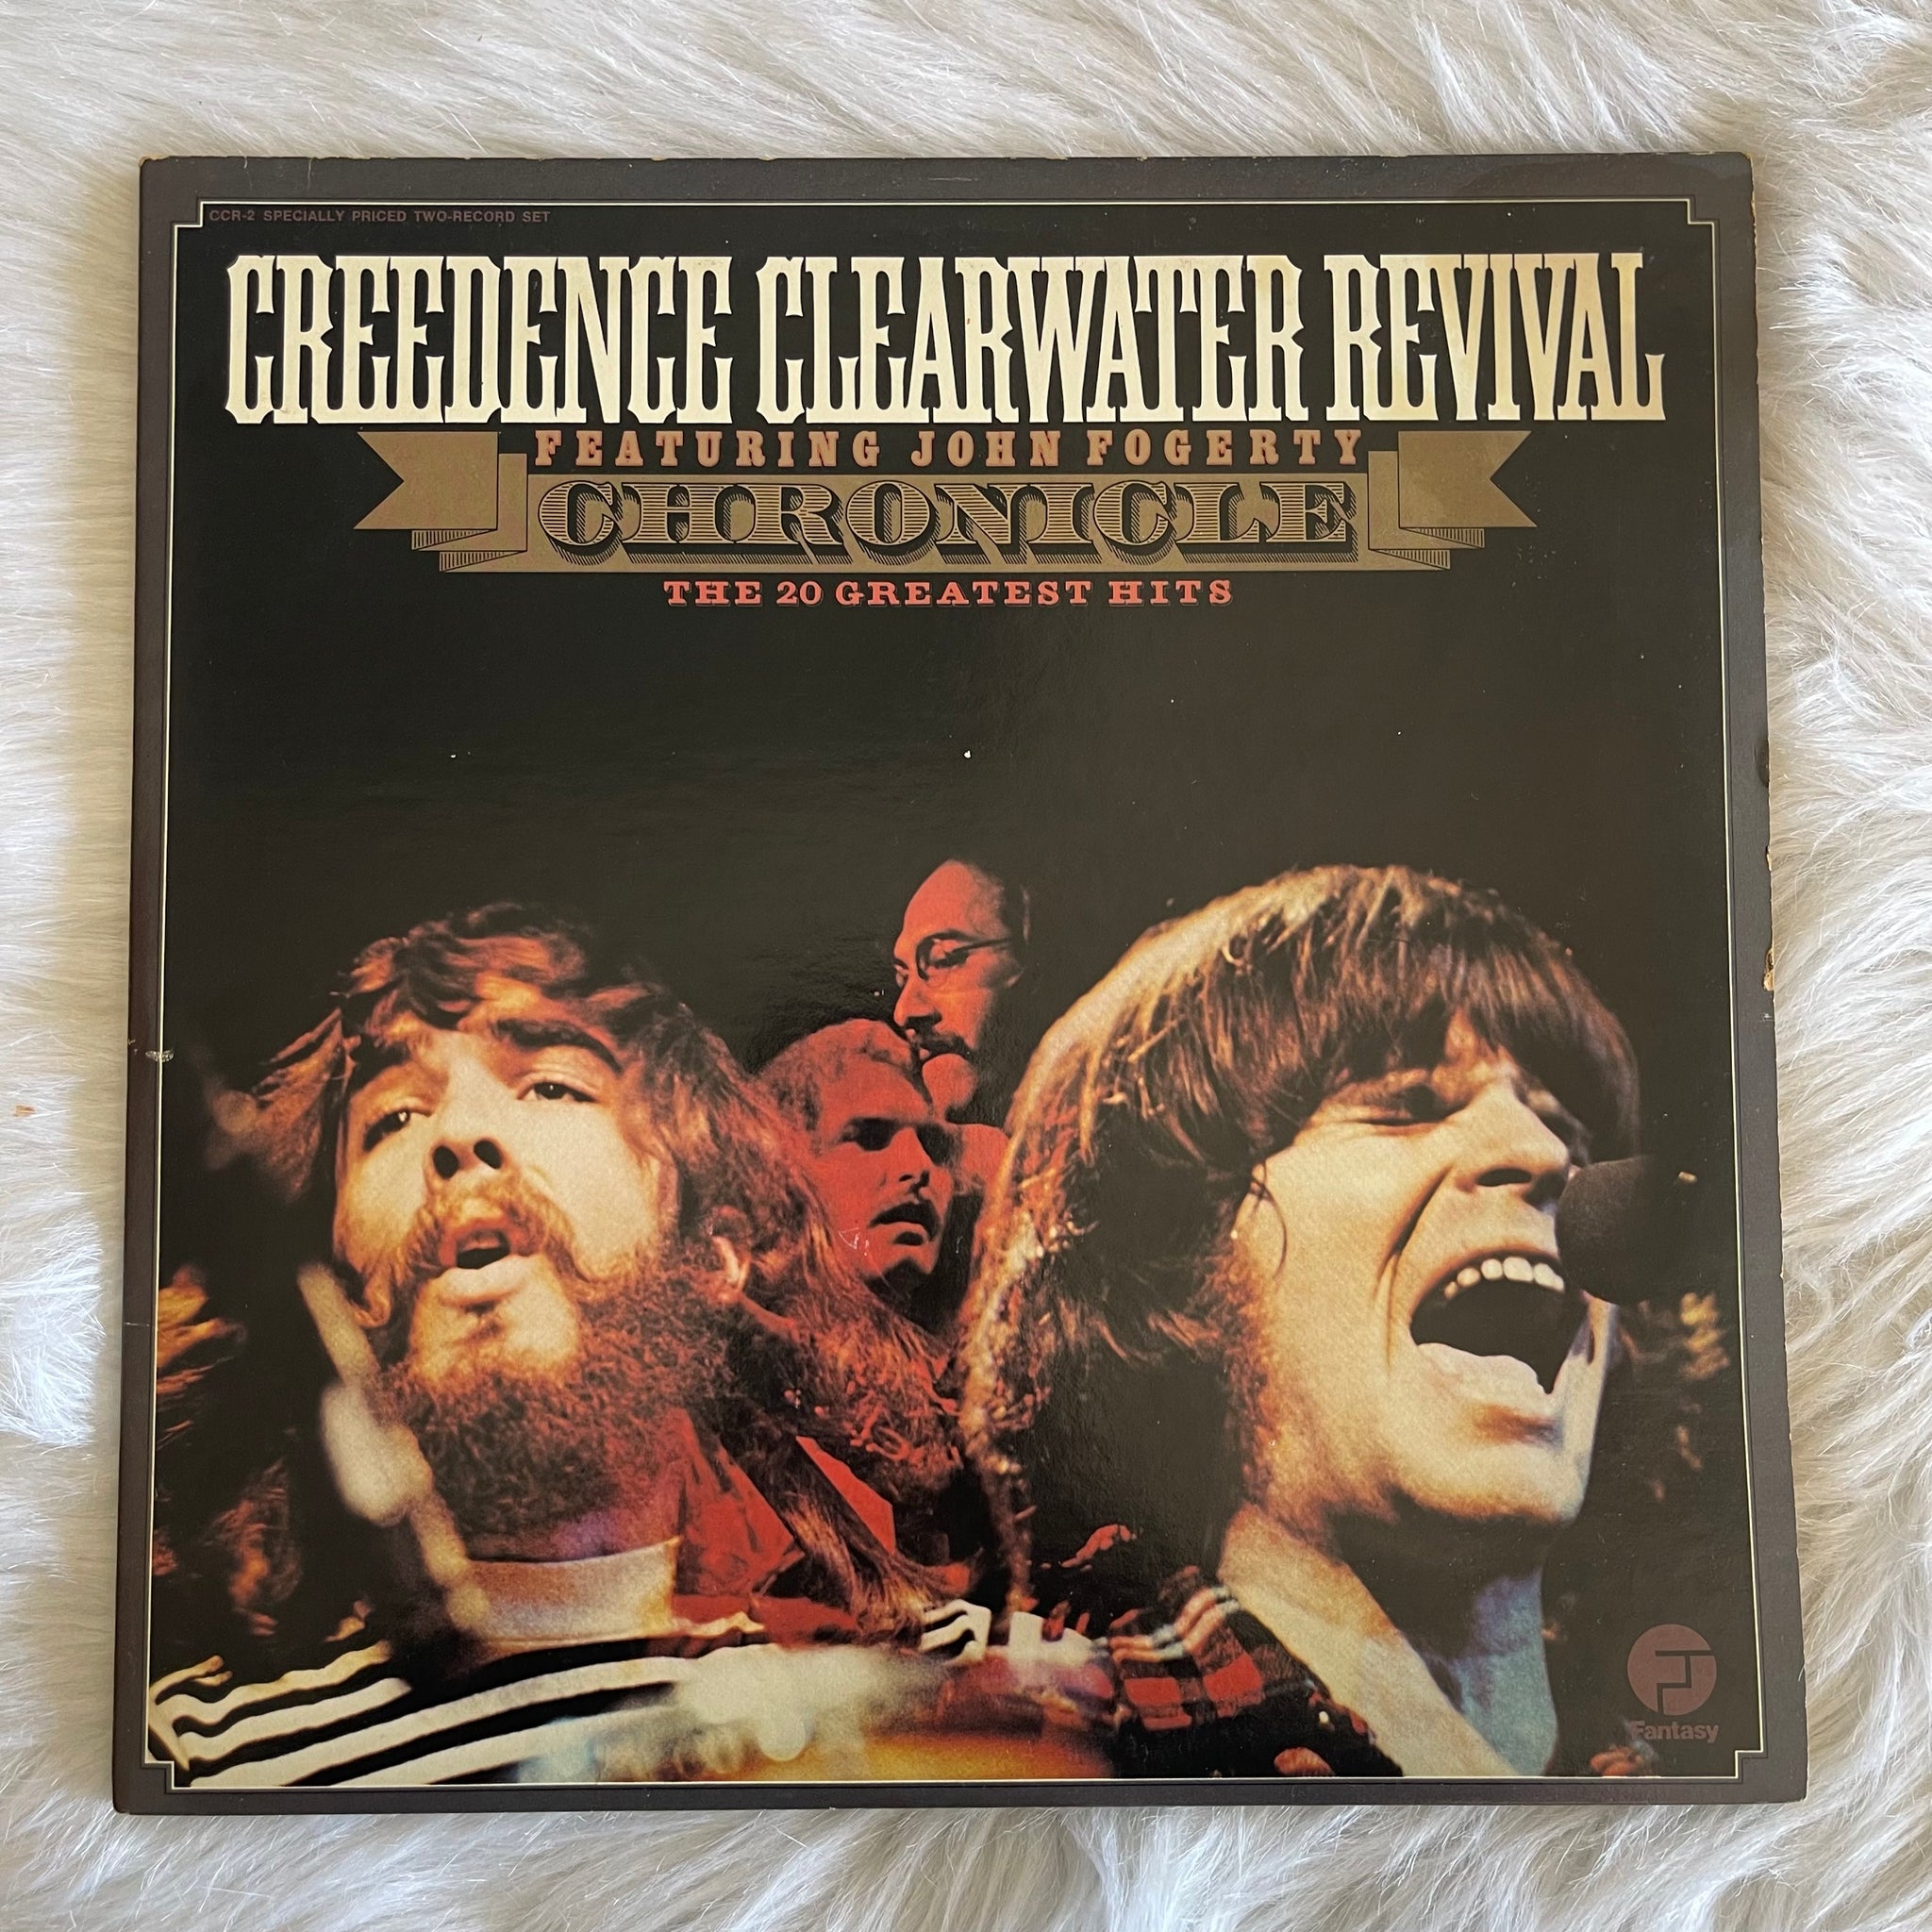 Creedence Clearwater Revival-Feat. John Fogerty Chronicle / The 20 Greatest Hits